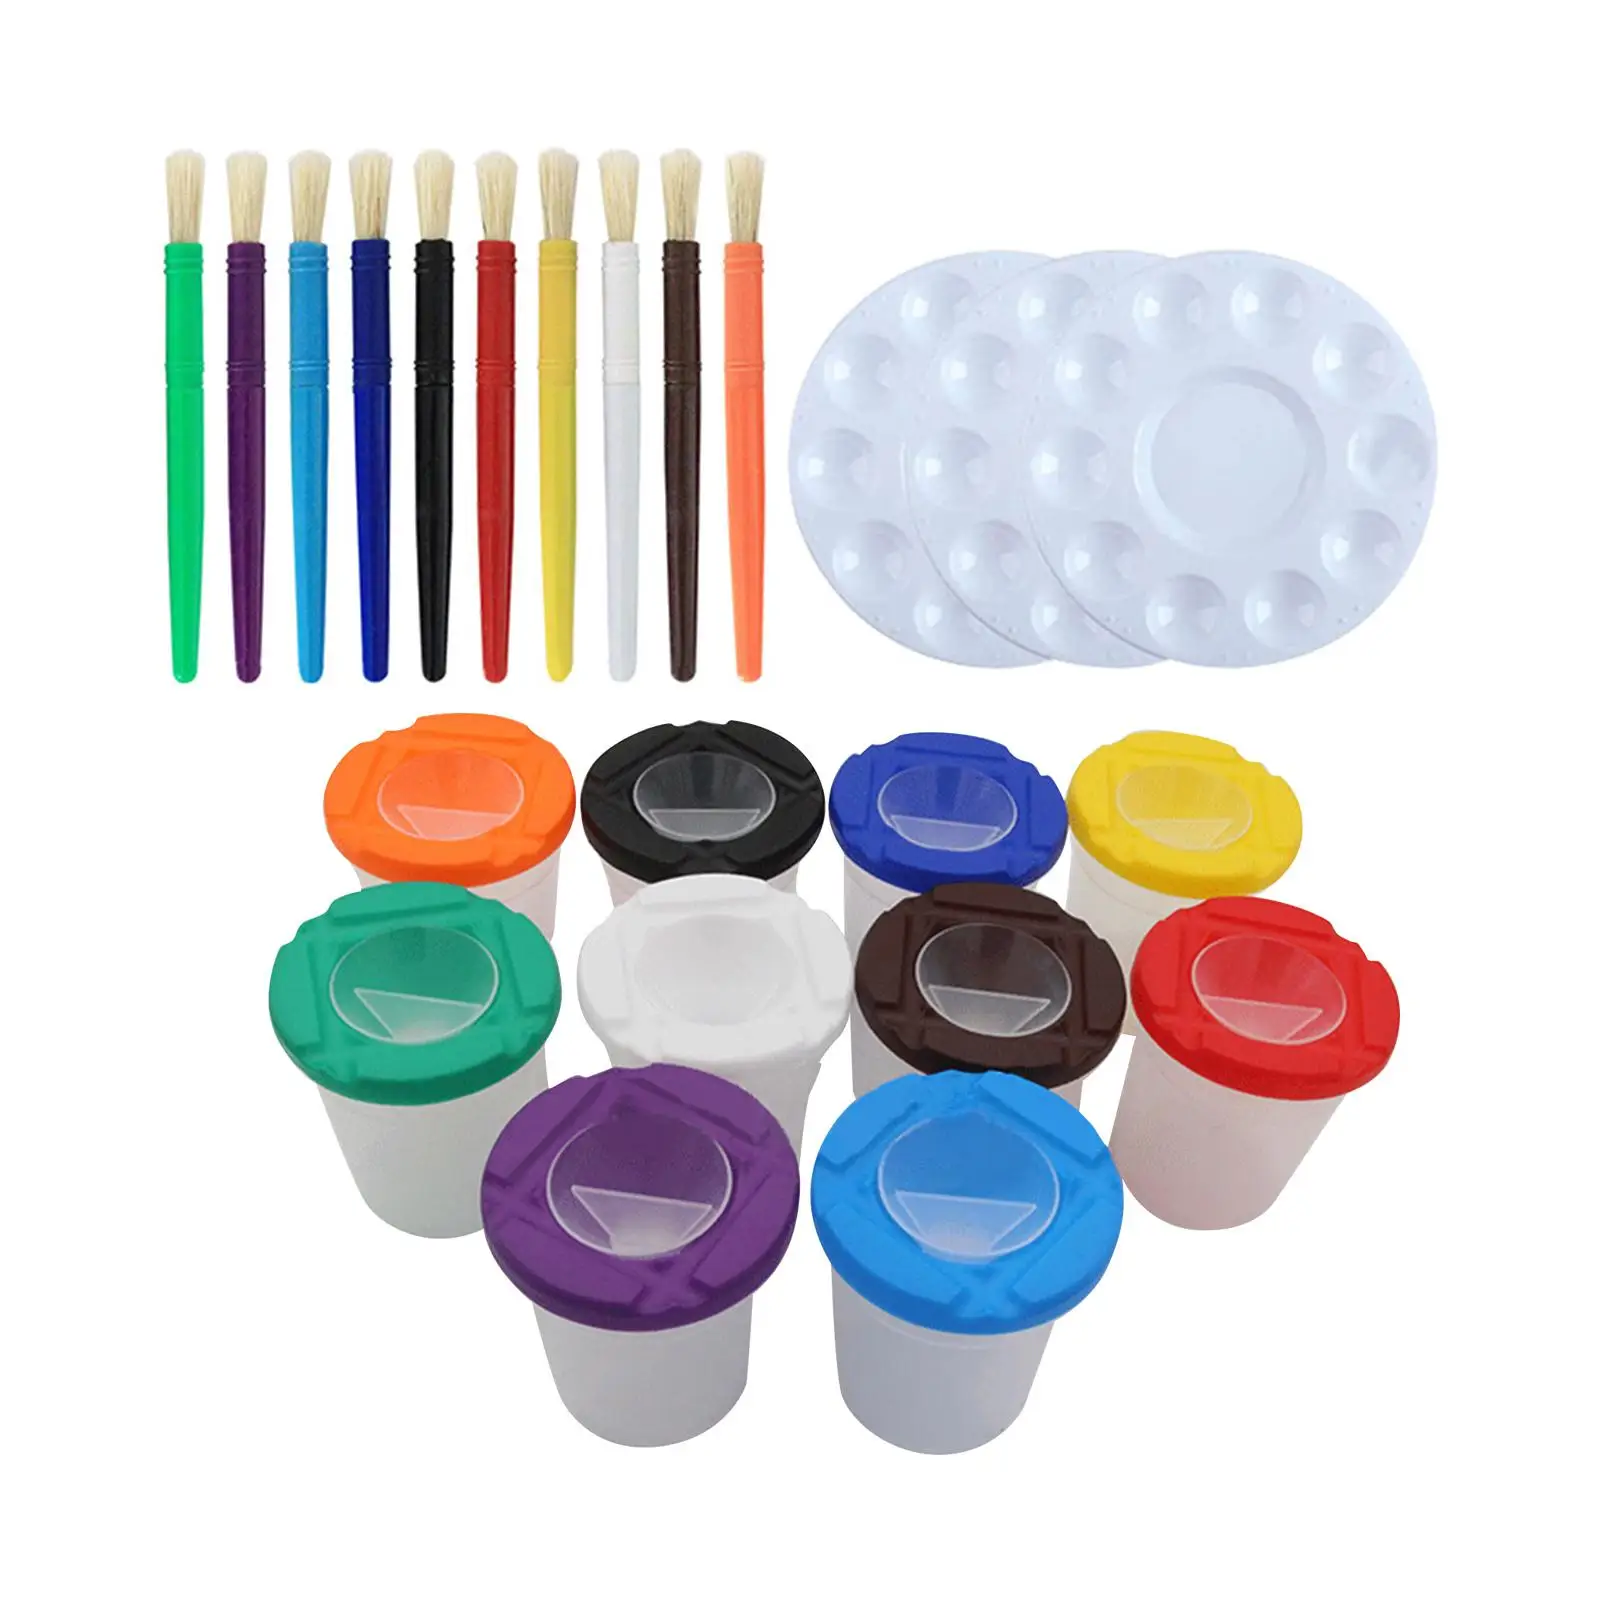 23x Paint Cups and Painting Brushes Painting Tool Pen Washing Cups Round Paintbrushes for Child Young Artist Beginners DIY